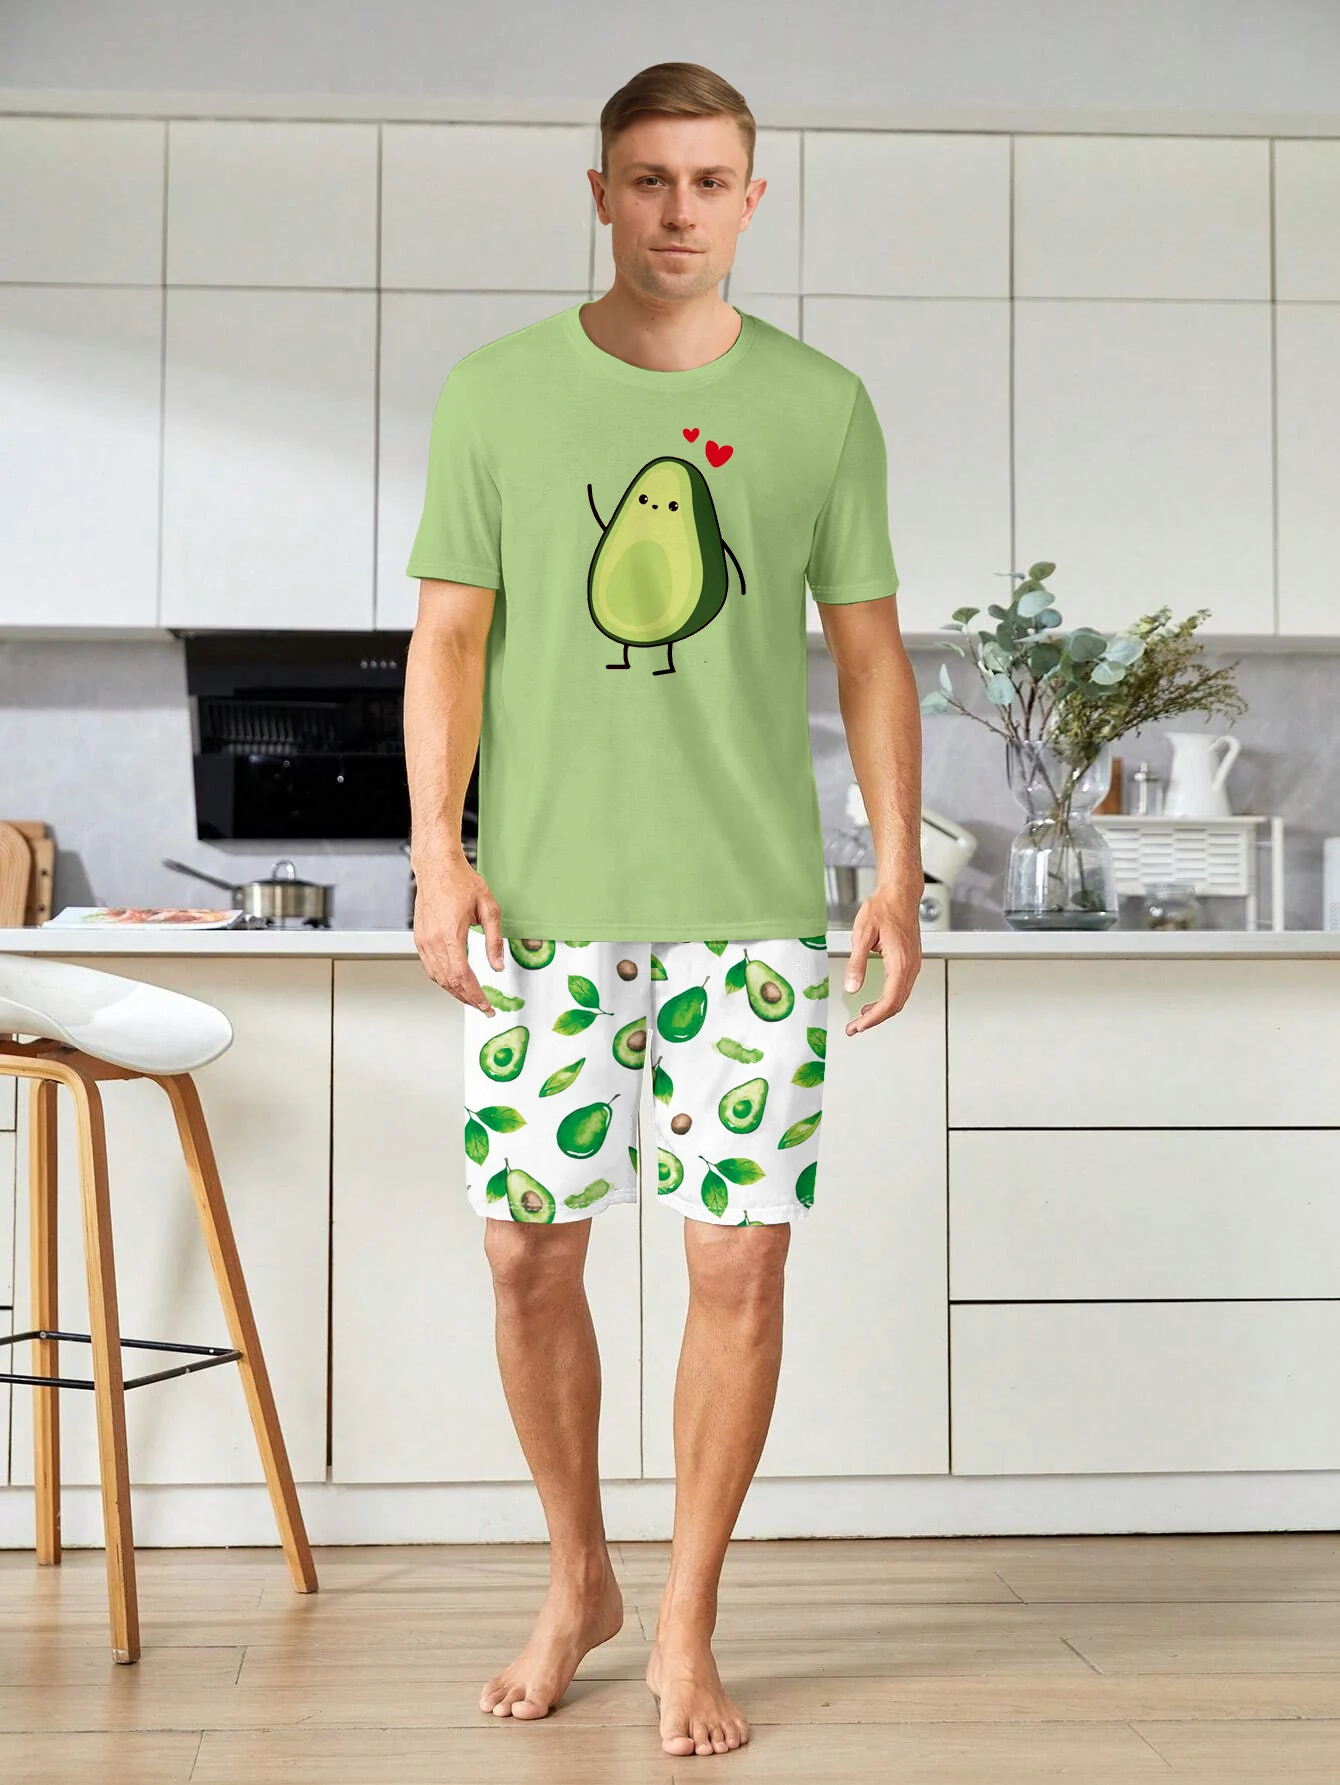 Men's casual pajamas home clothing fashionable style avocado series short sleeved shorts two-piece set for parent-child wear